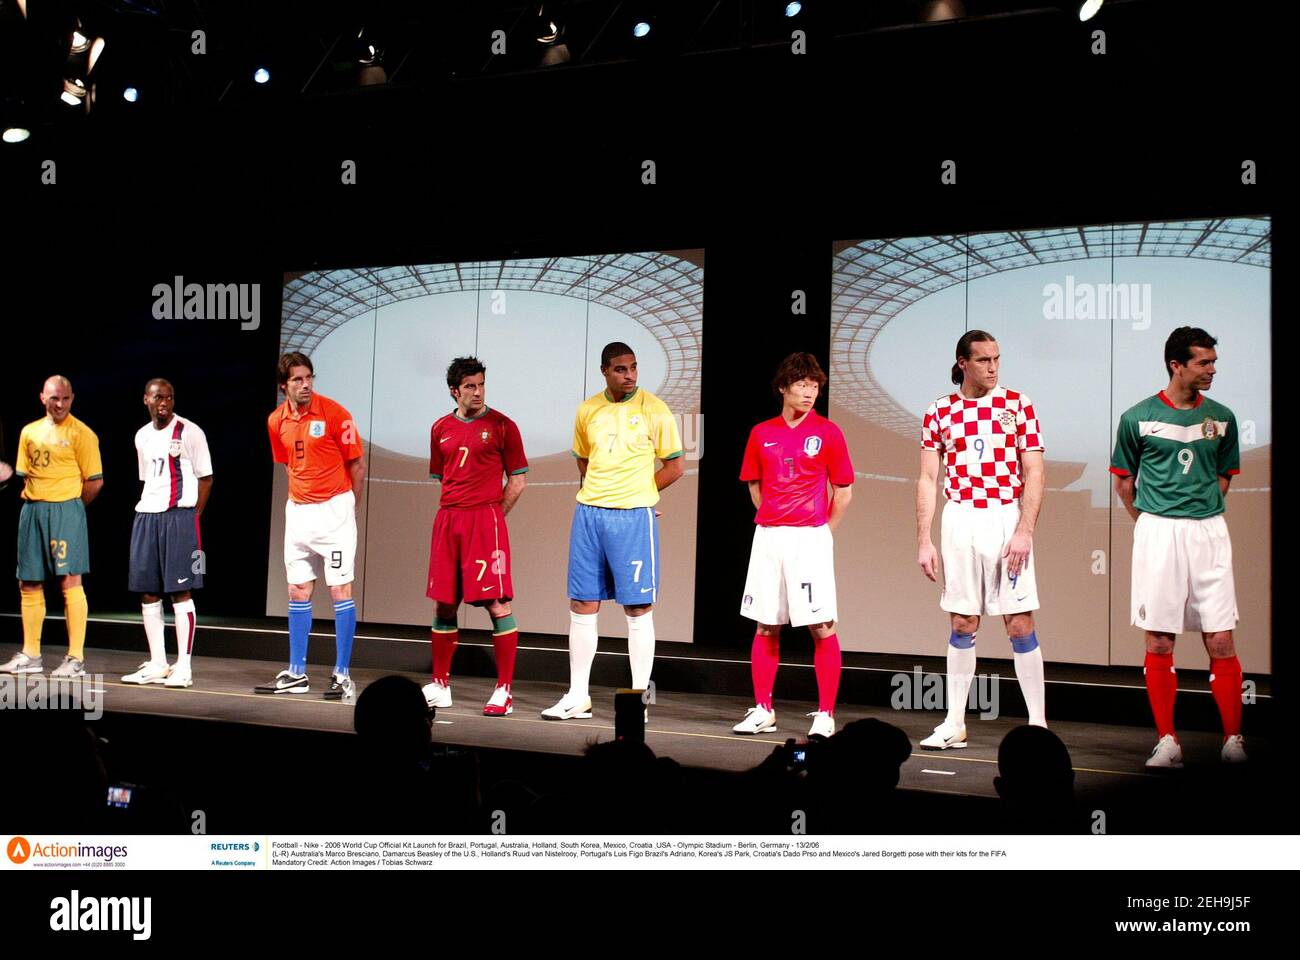 Football - Nike - 2006 World Cup Official Kit Launch for Brazil, Portugal, Australia, Holland, South Korea, Mexico, Croatia & USA - Olympic Stadium - Berlin, Germany - 13/2/06  (L-R) Australia's Marco Bresciano, Damarcus Beasley of the U.S., Holland's Ruud van Nistelrooy, Portugal's Luis Figo Brazil's Adriano, Korea's JS Park, Croatia's Dado Prso and Mexico's Jared Borgetti pose with their kits for the FIFA  Mandatory Credit: Action Images / Tobias Schwarz Stock Photo